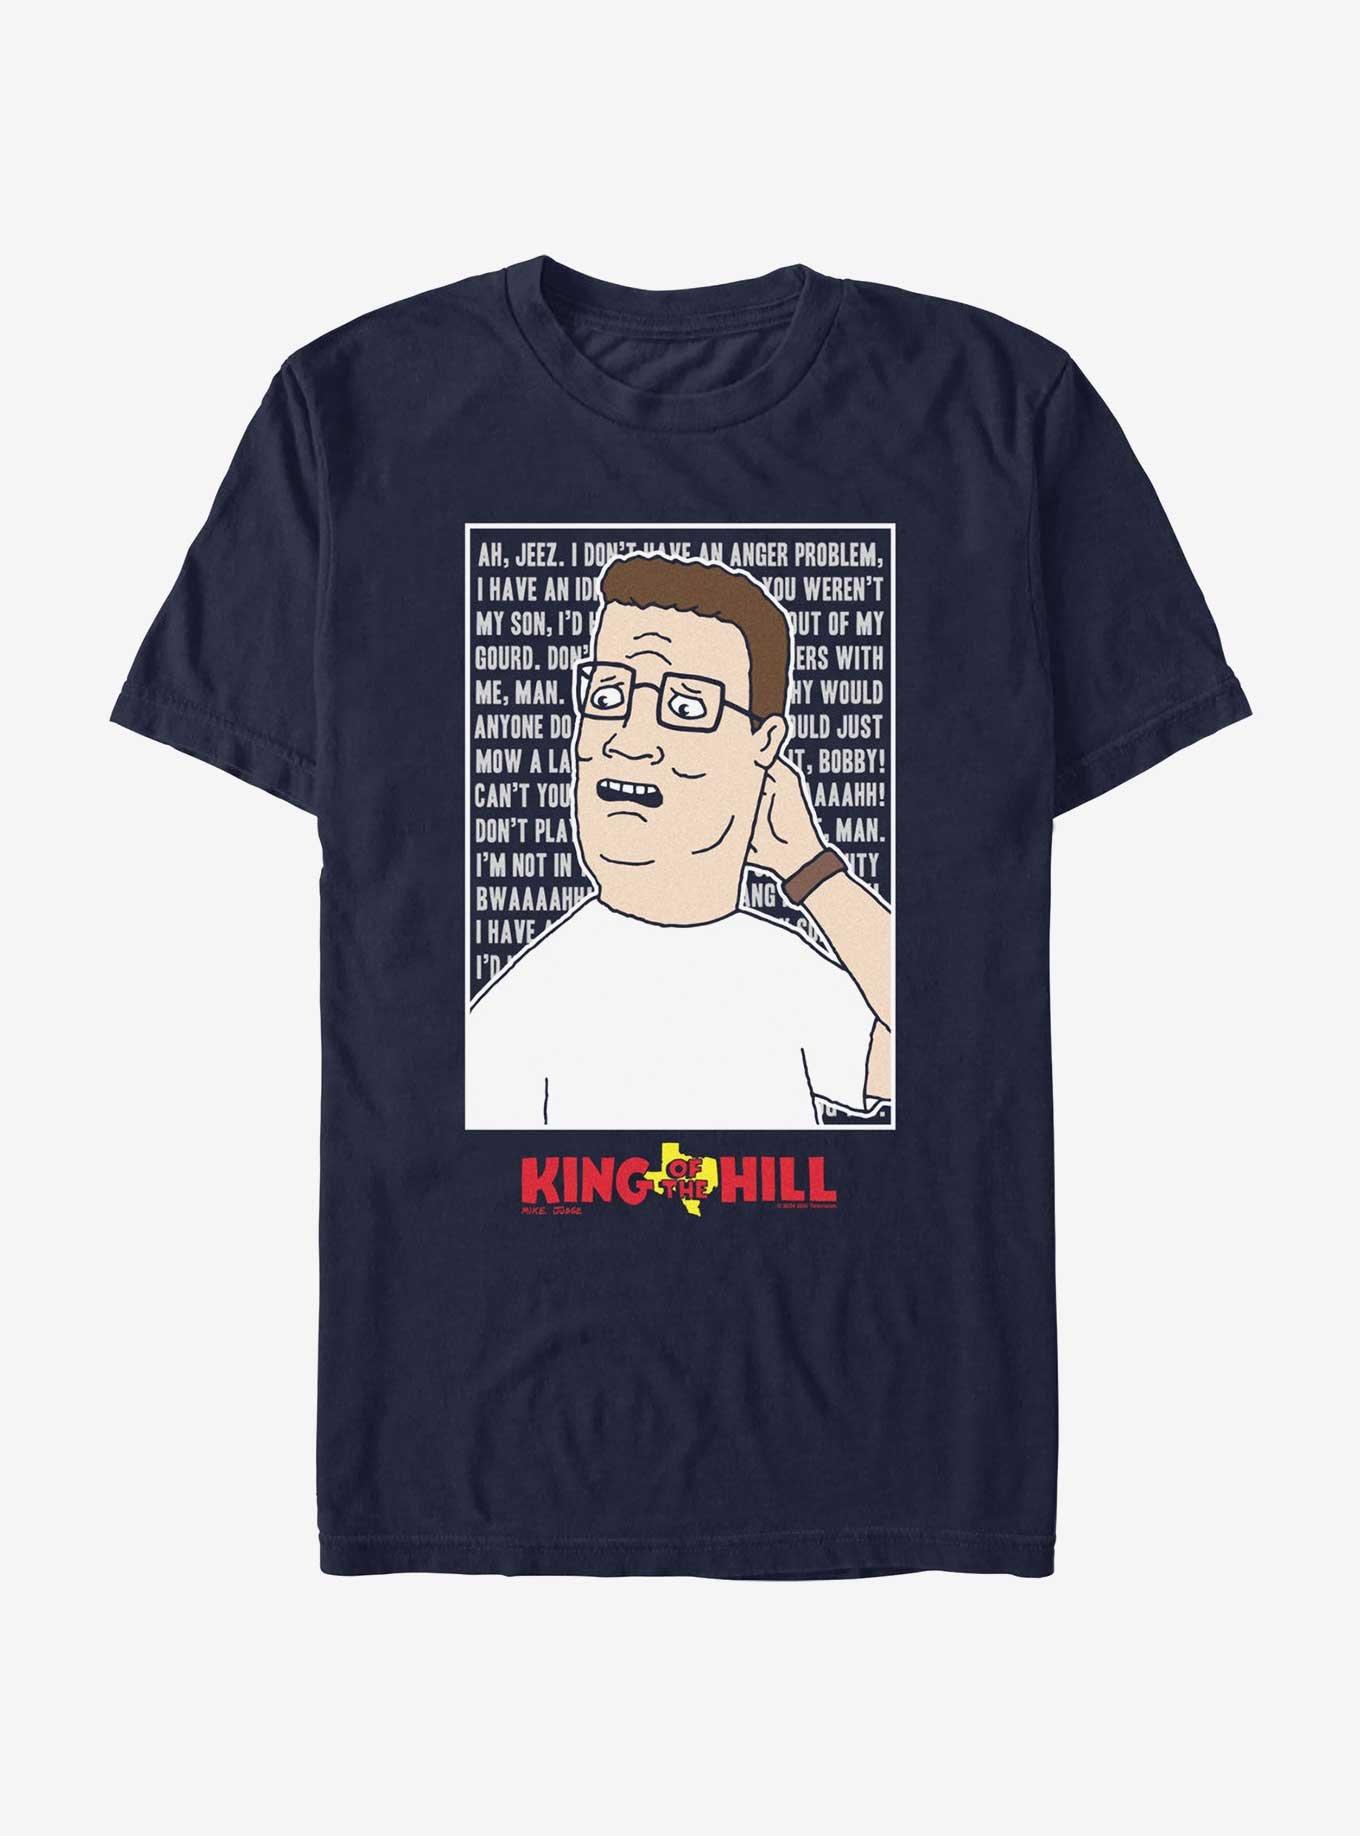 King of the Hill Hank Hill Quote Box T-Shirt, NAVY, hi-res